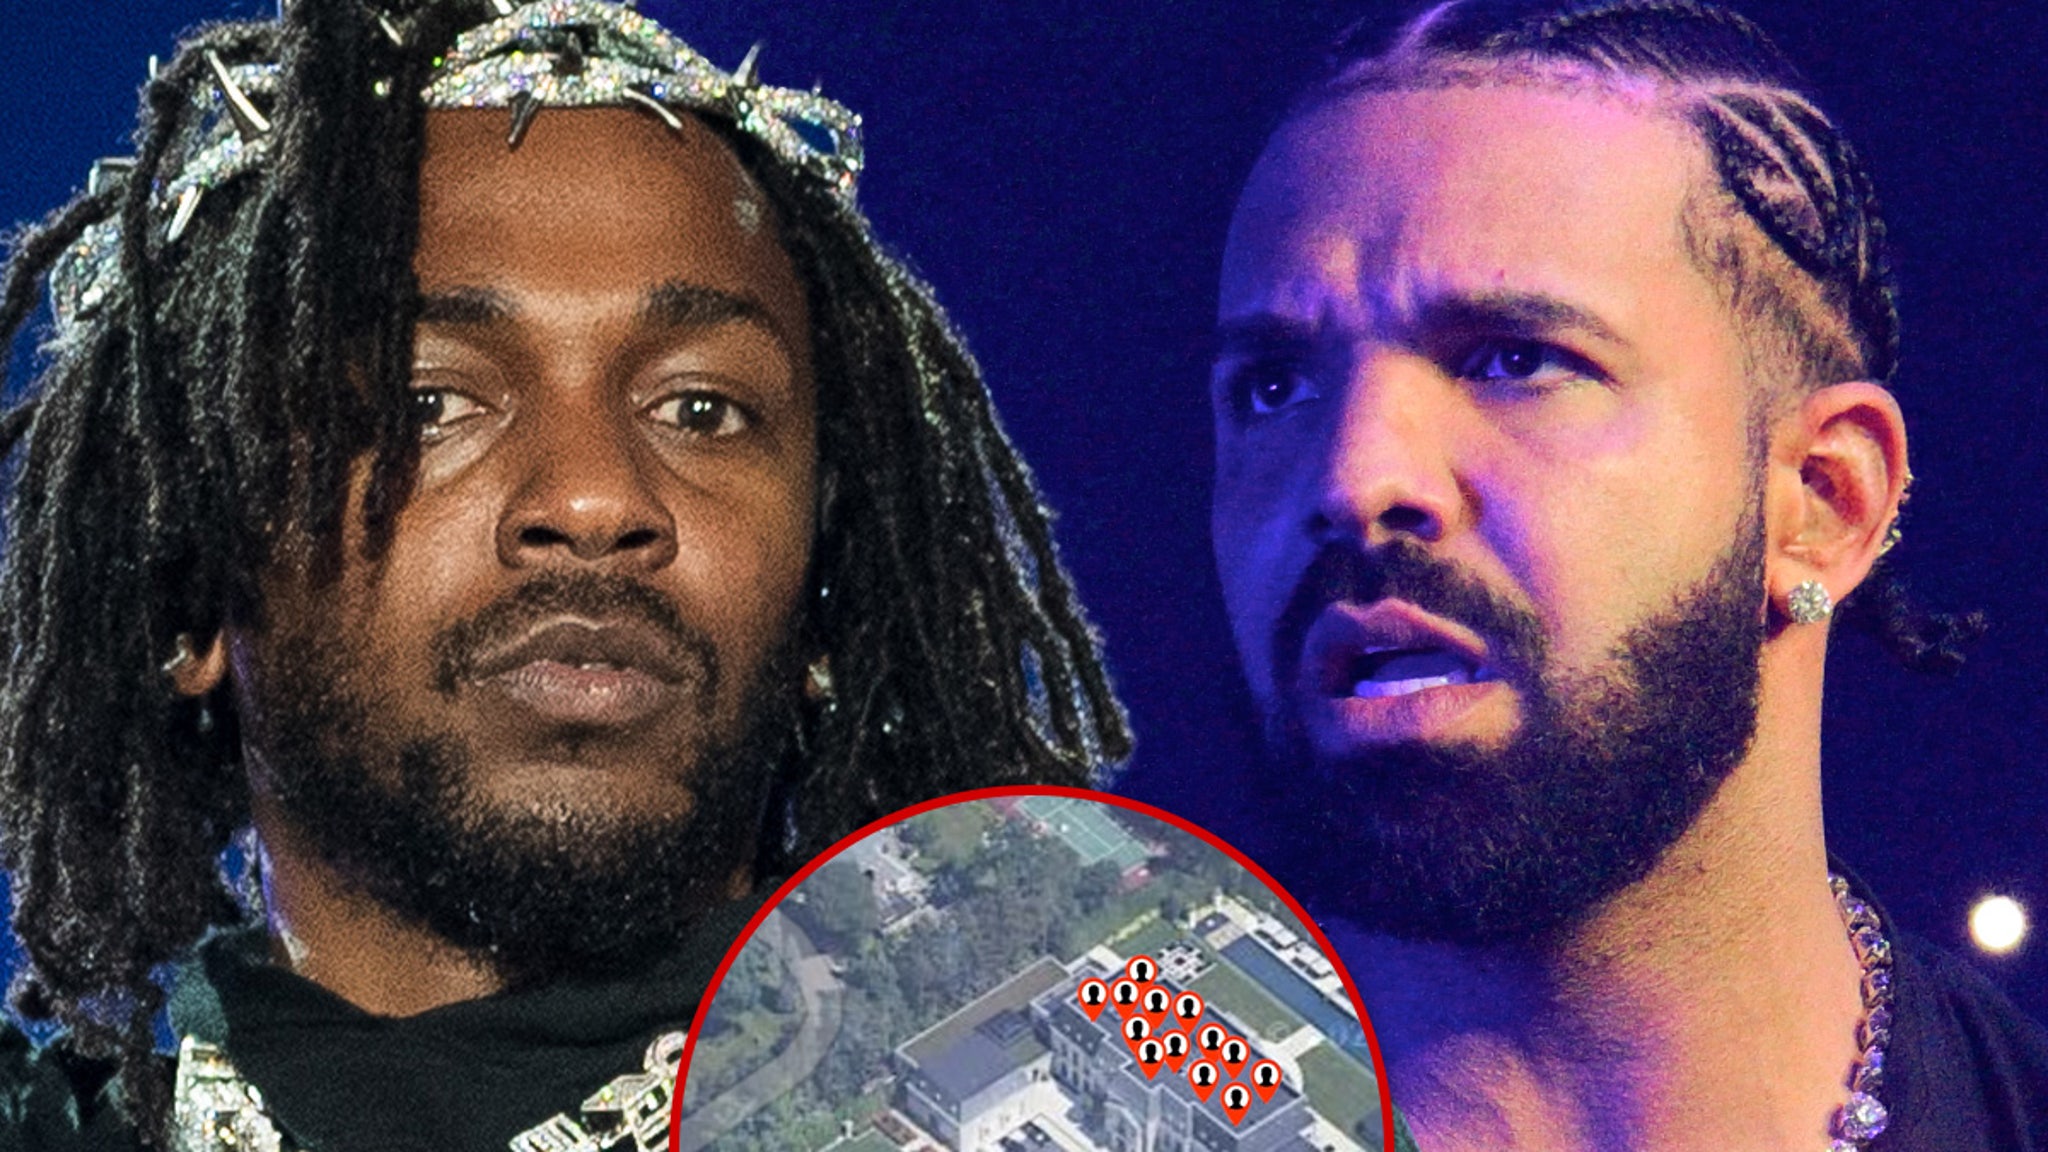 New Diss Track by Kendrick Lamar Accuses Drake of Being a ‘Pedophile’